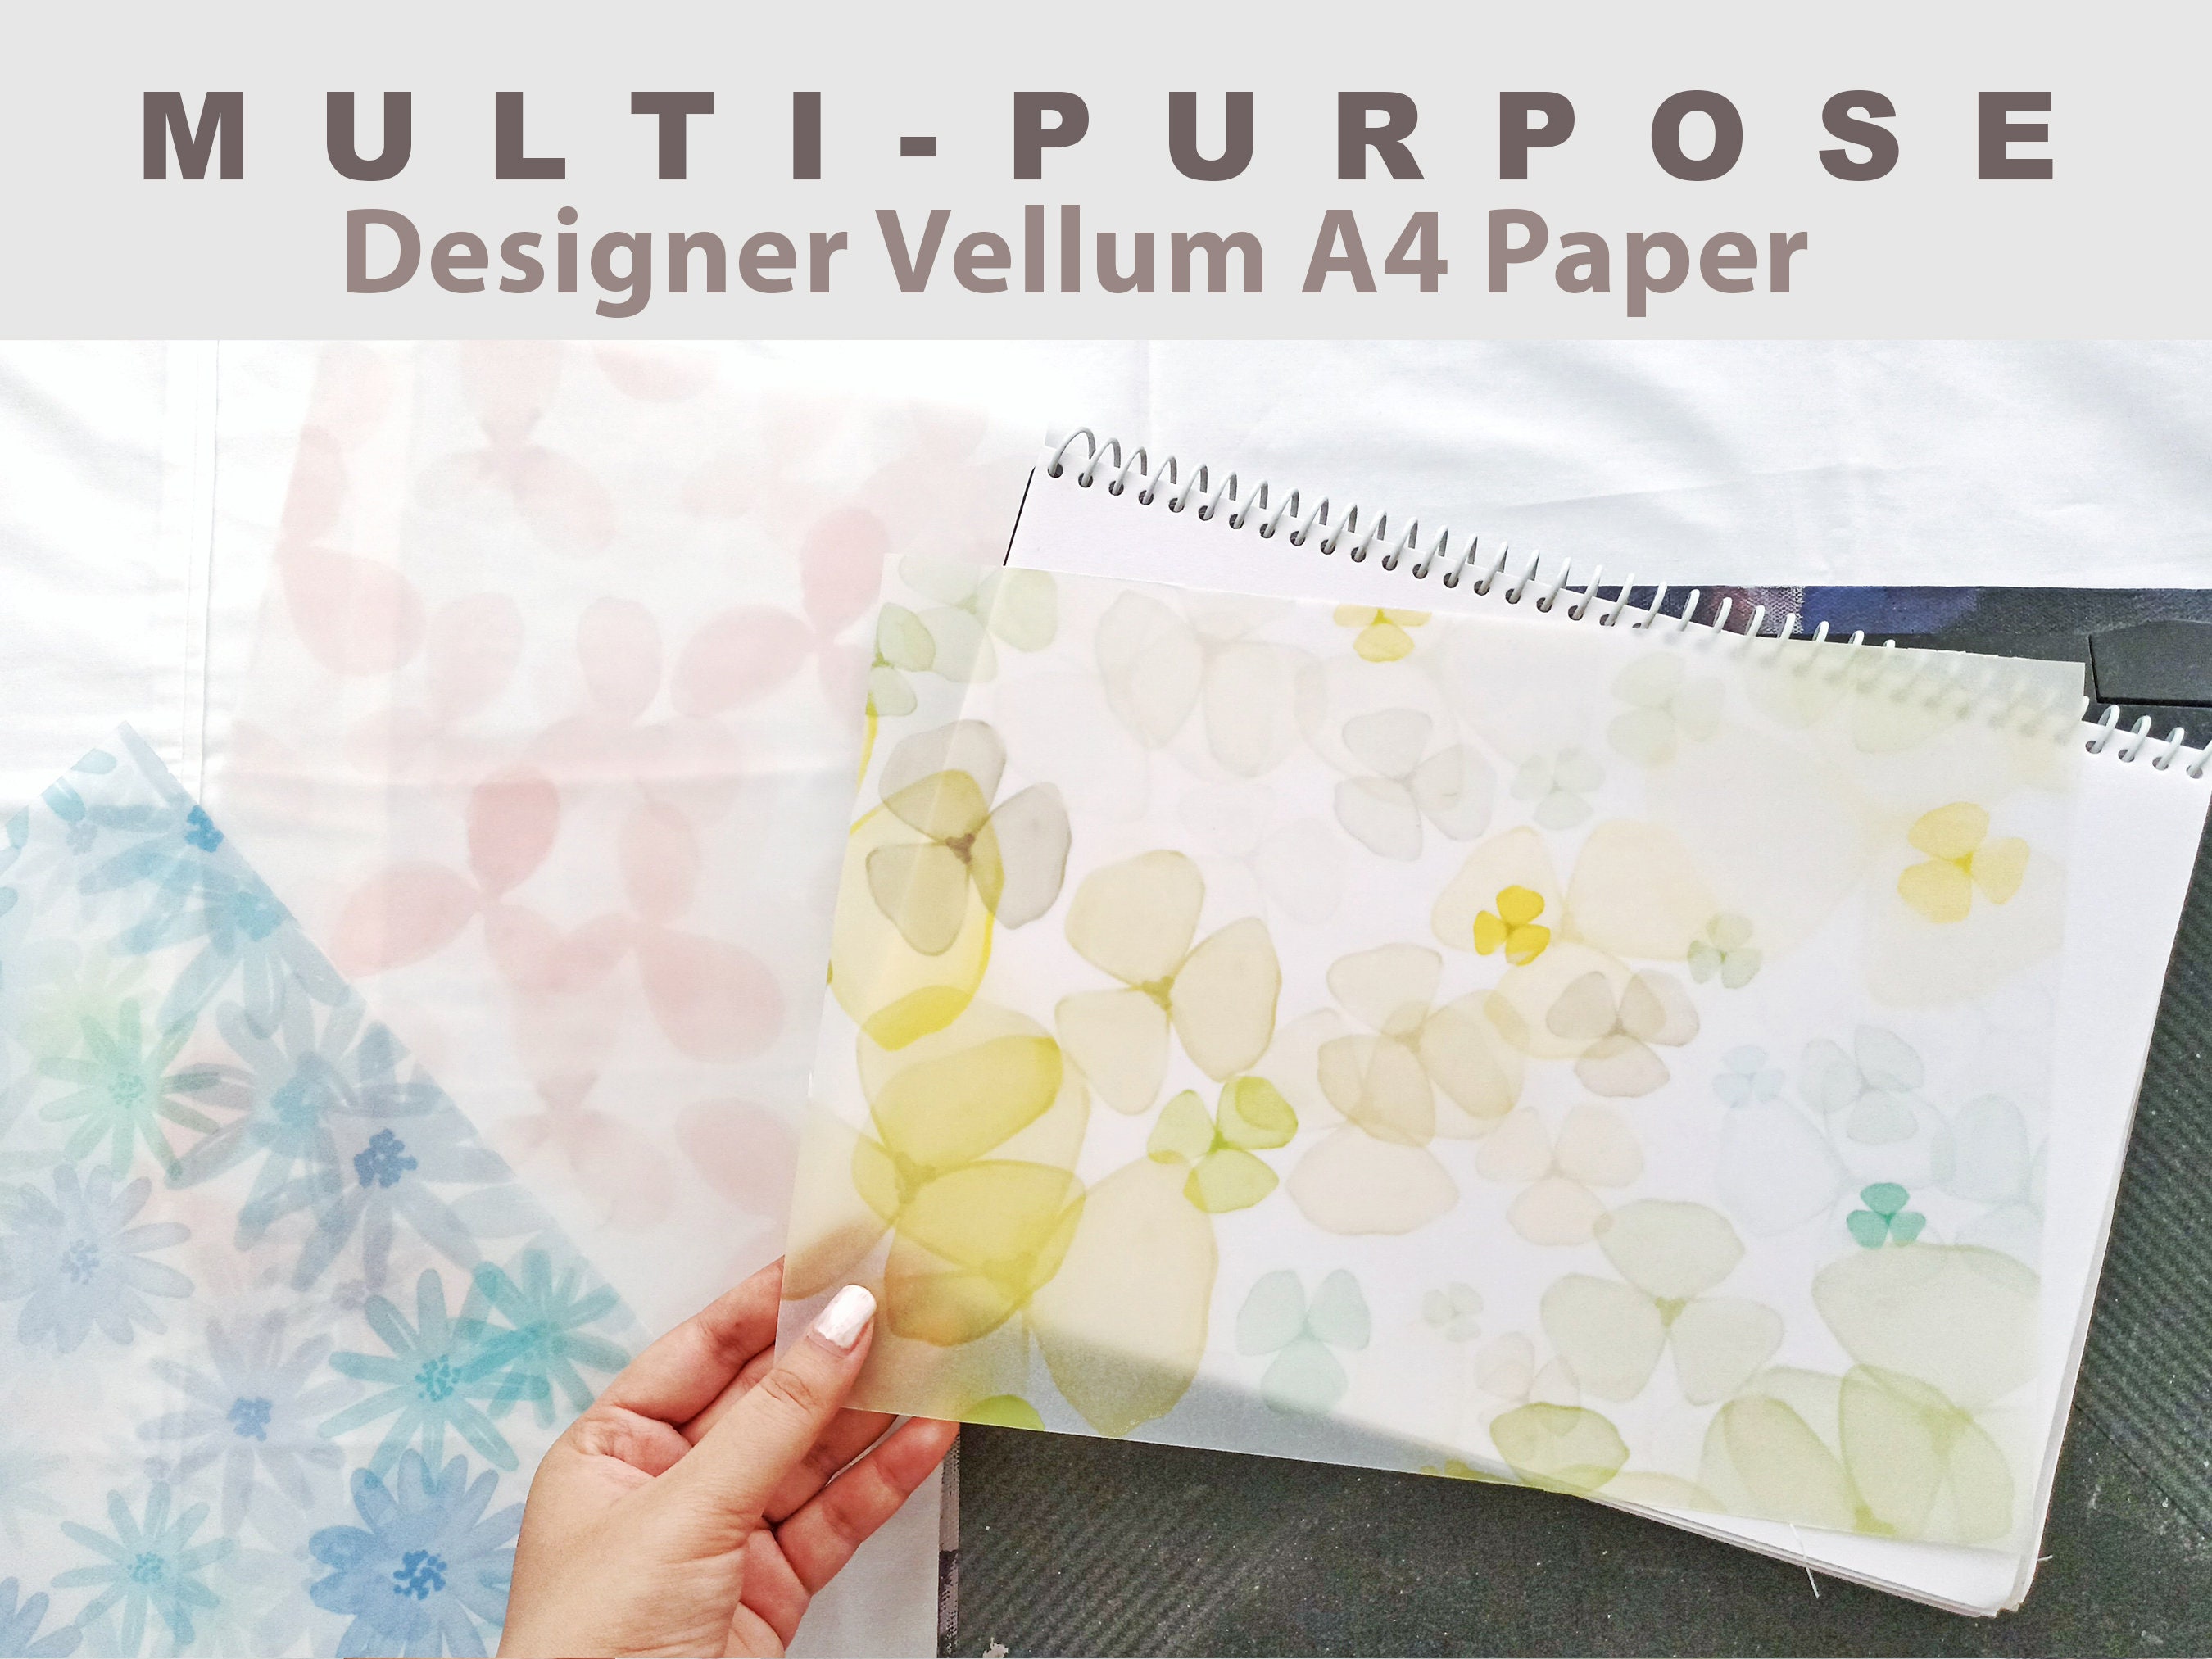  Translucent Vellum Paper - Pack of 50 - Vellum Transparent Paper  8.5 x 11 inches 110GSM Paper Printable Sketching Tracing Drawing Craft